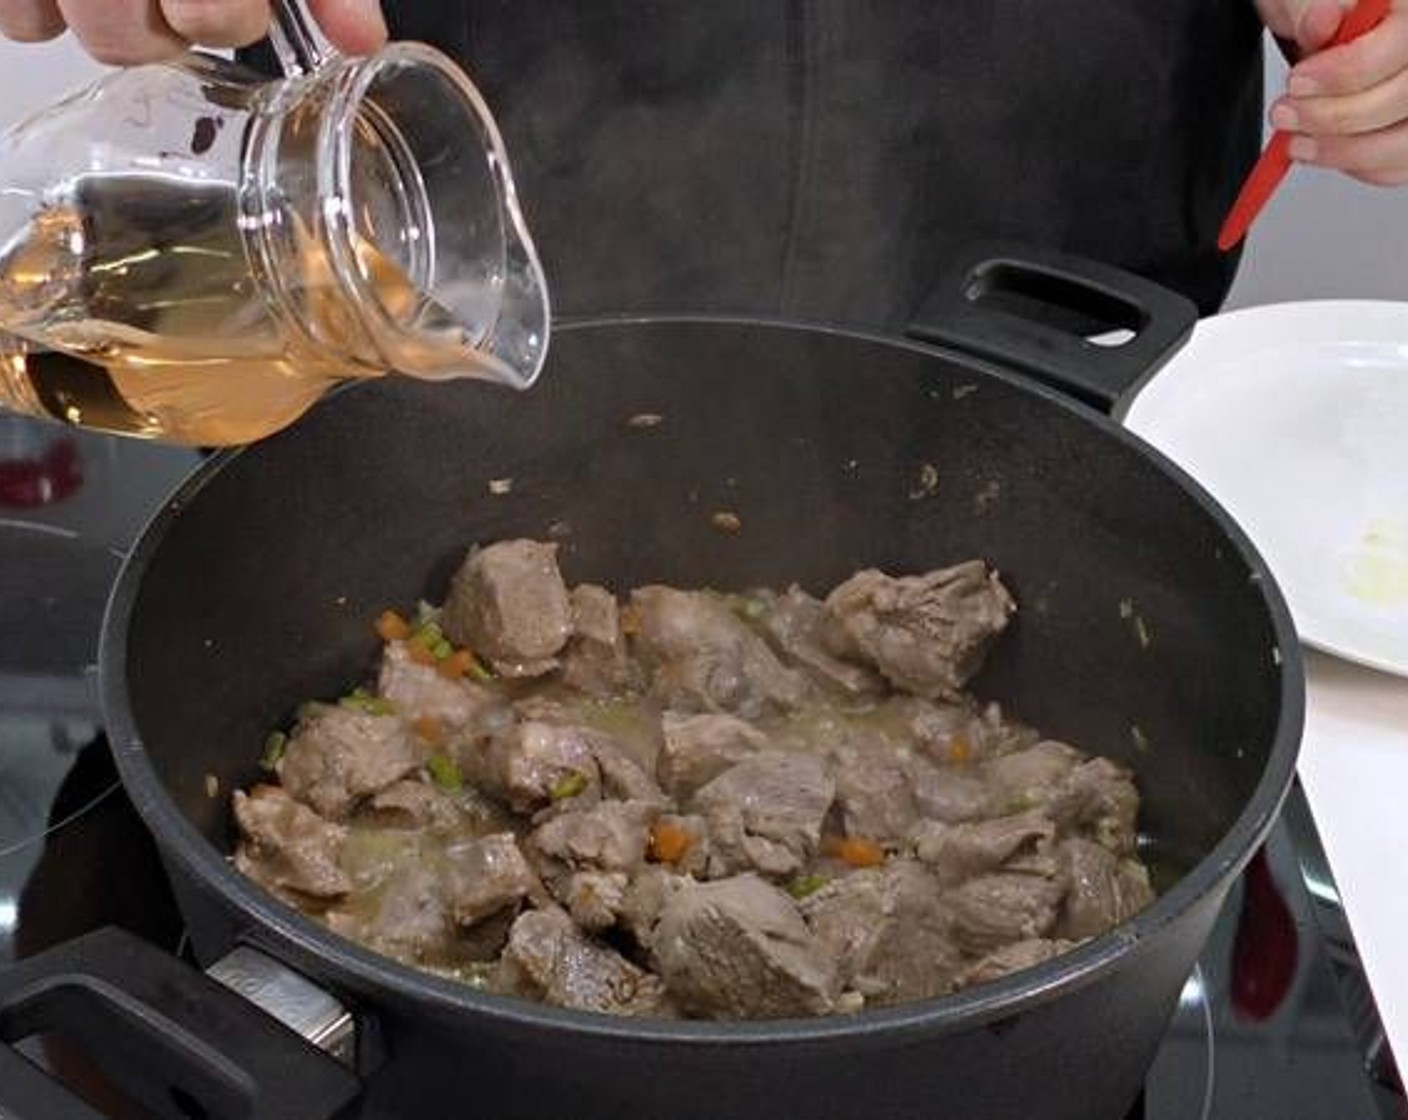 step 3 Once the lamb has browned add in the White Wine (to taste), Tomato Sauce (1/3 cup), and enough Water (as needed) to cover the meat.